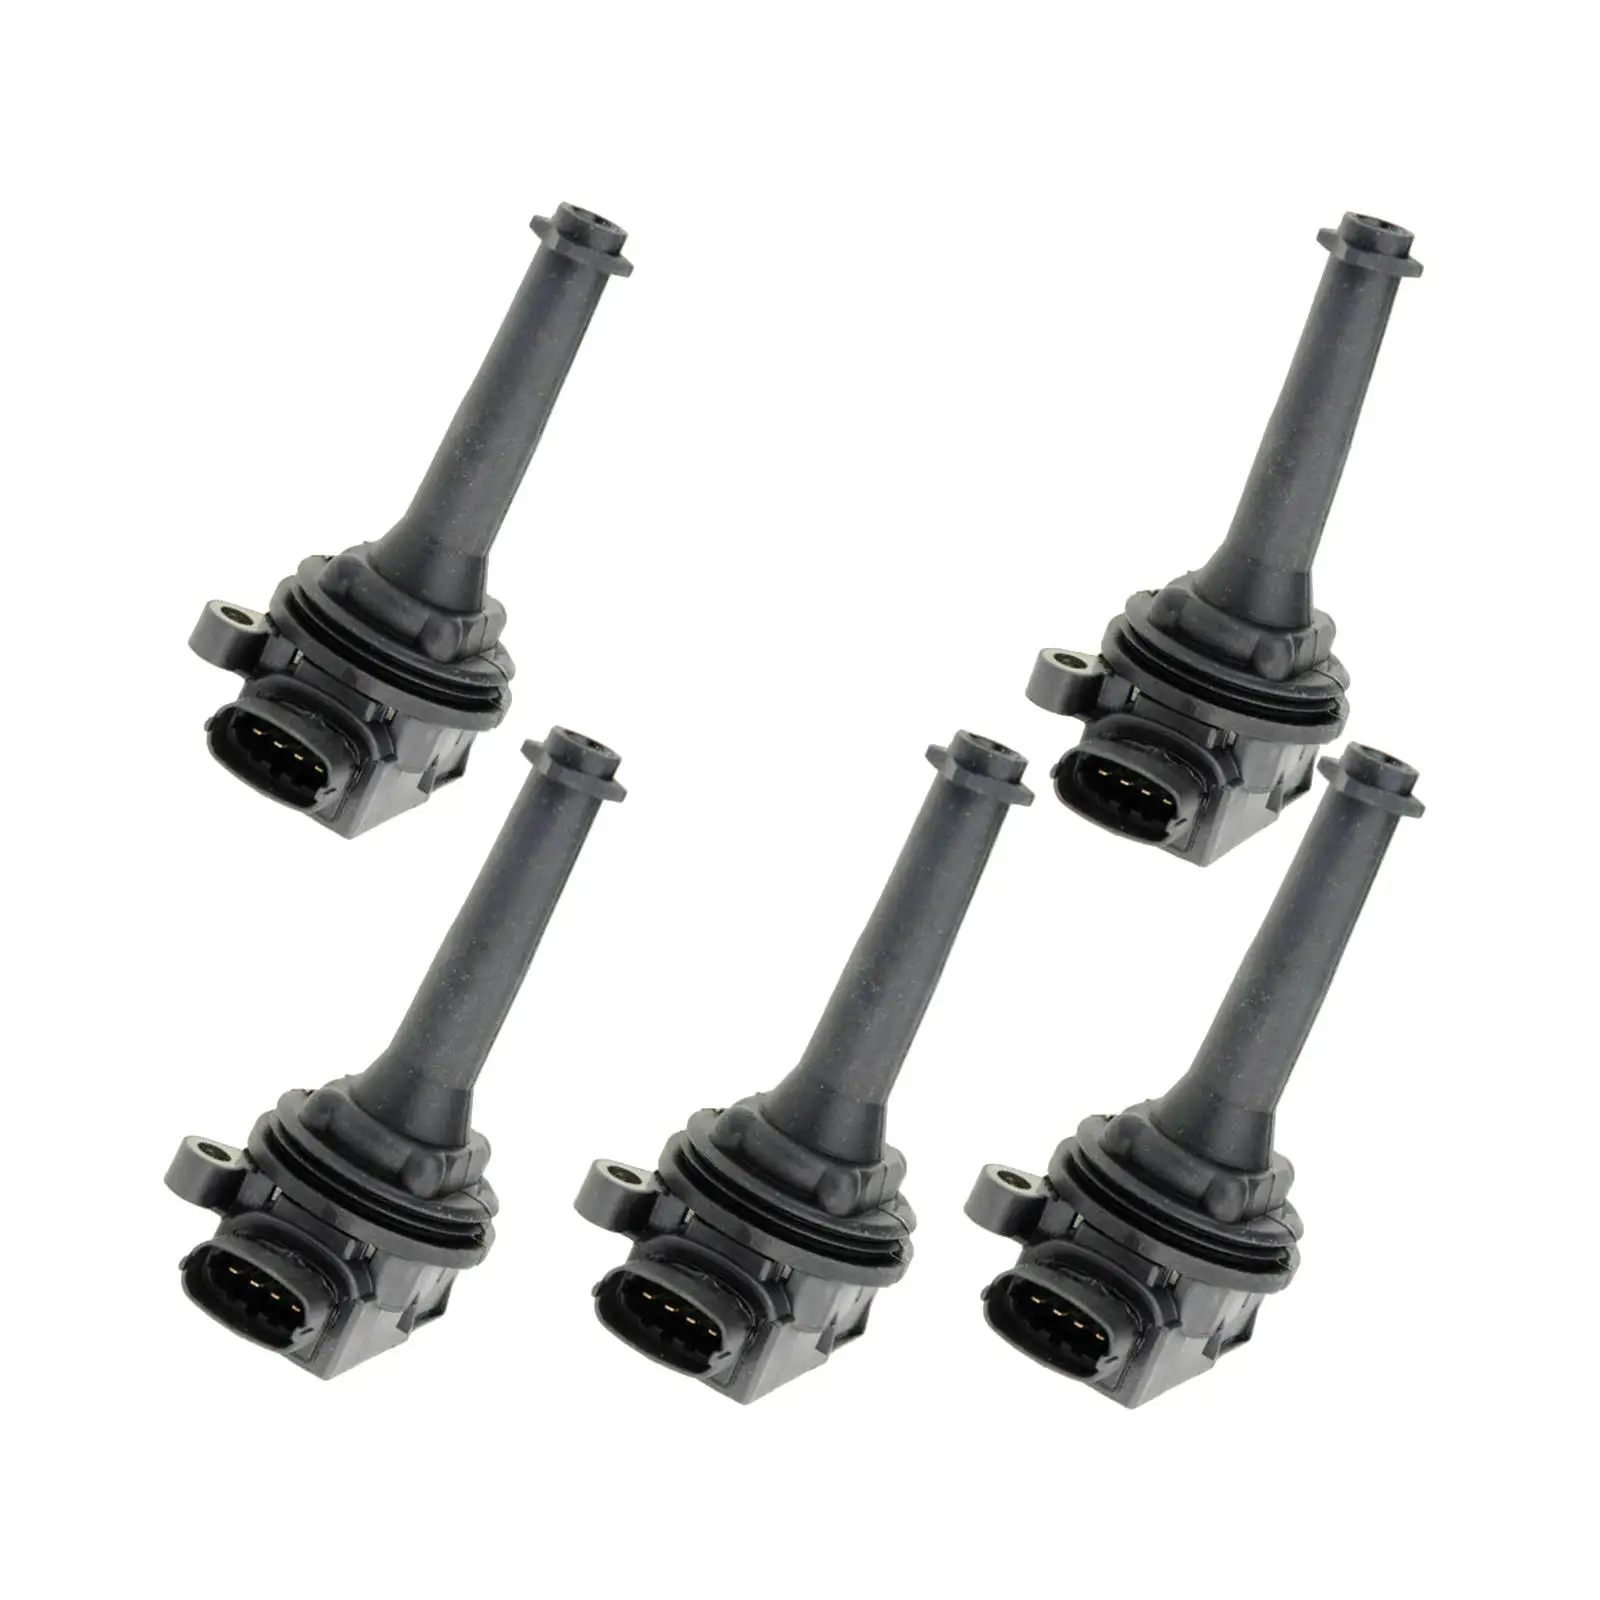 Ignition coil Pack 5 fits Volvo C70 S70 XC70 XC90 S60 UF341 C1258 9125601 